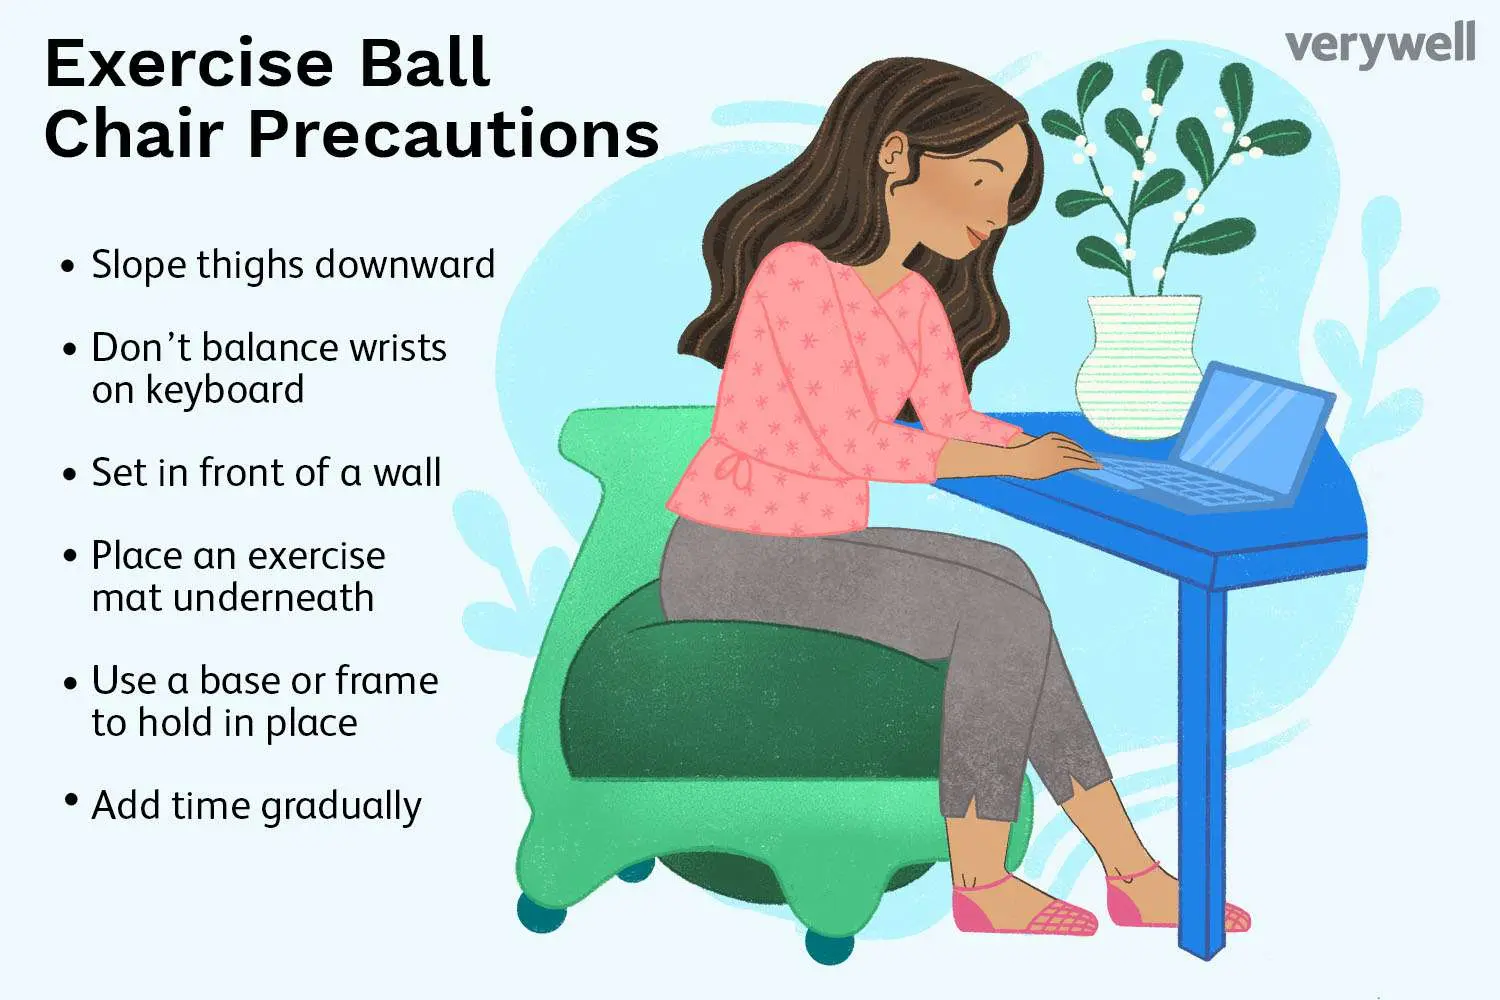 flexible seating yoga balls - What are the disadvantages of sitting on a yoga ball